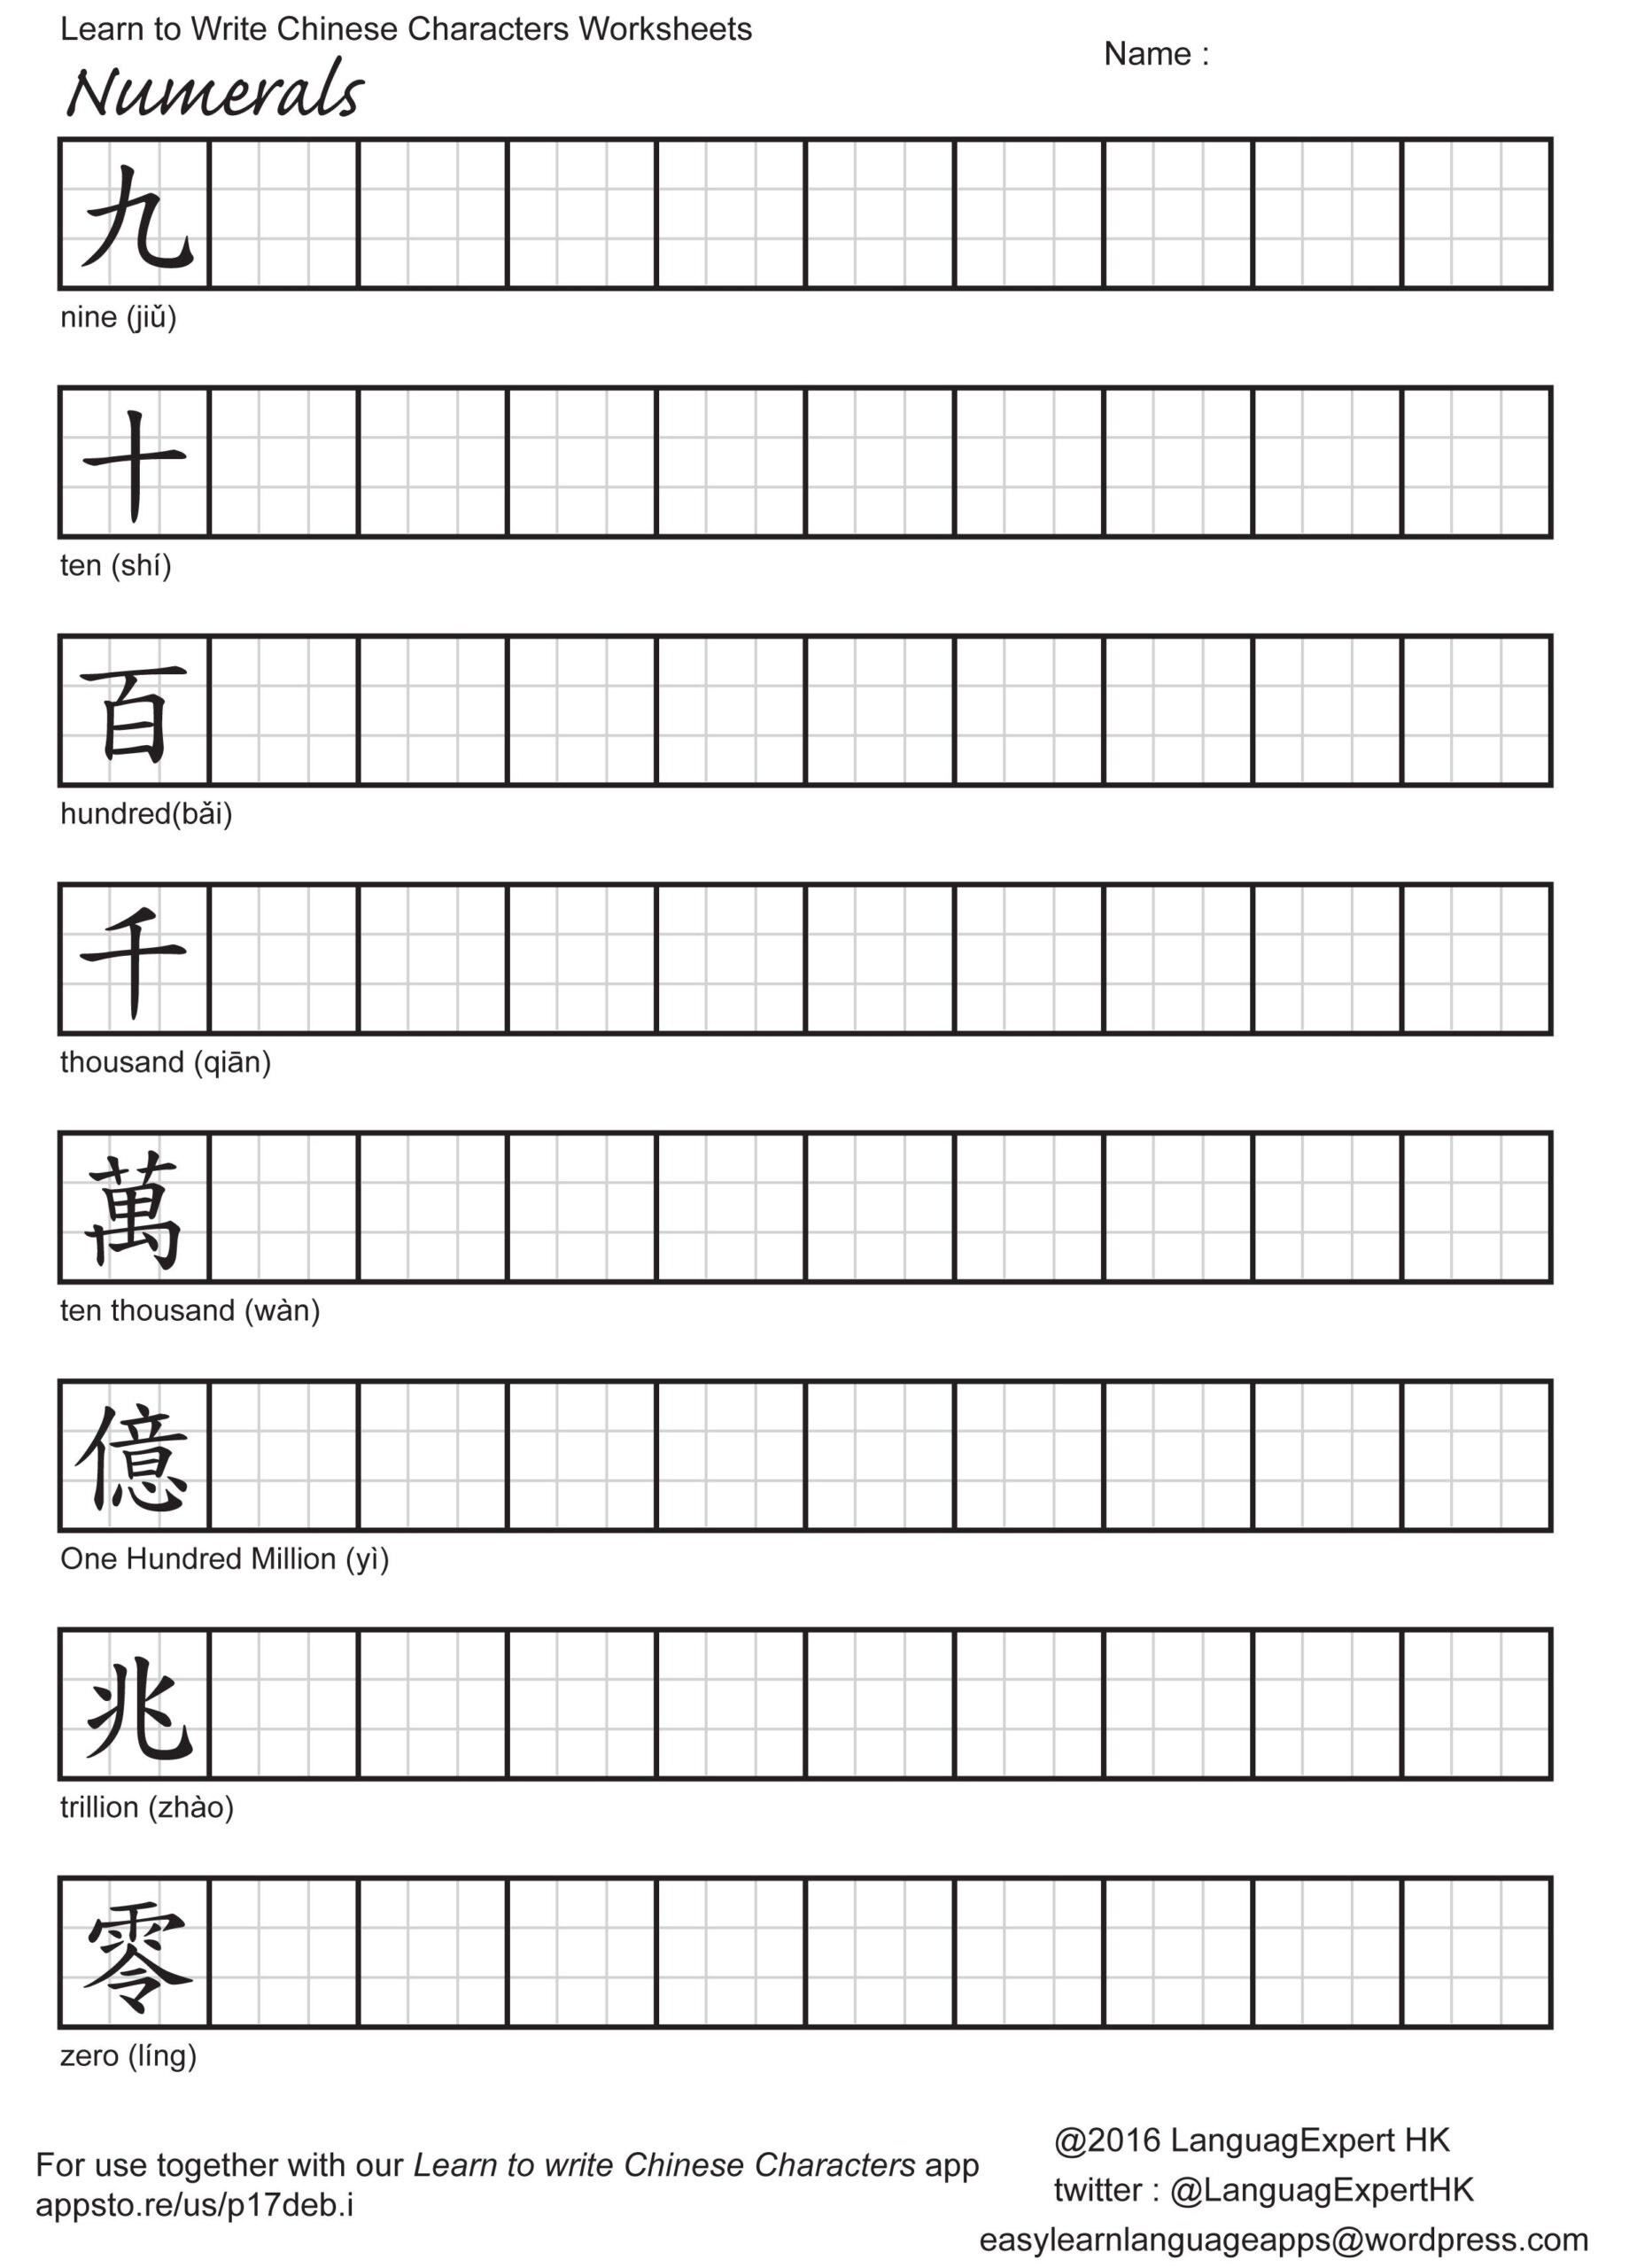 Learn To Write Chinese Characters Worksheets | ตำราเรียน